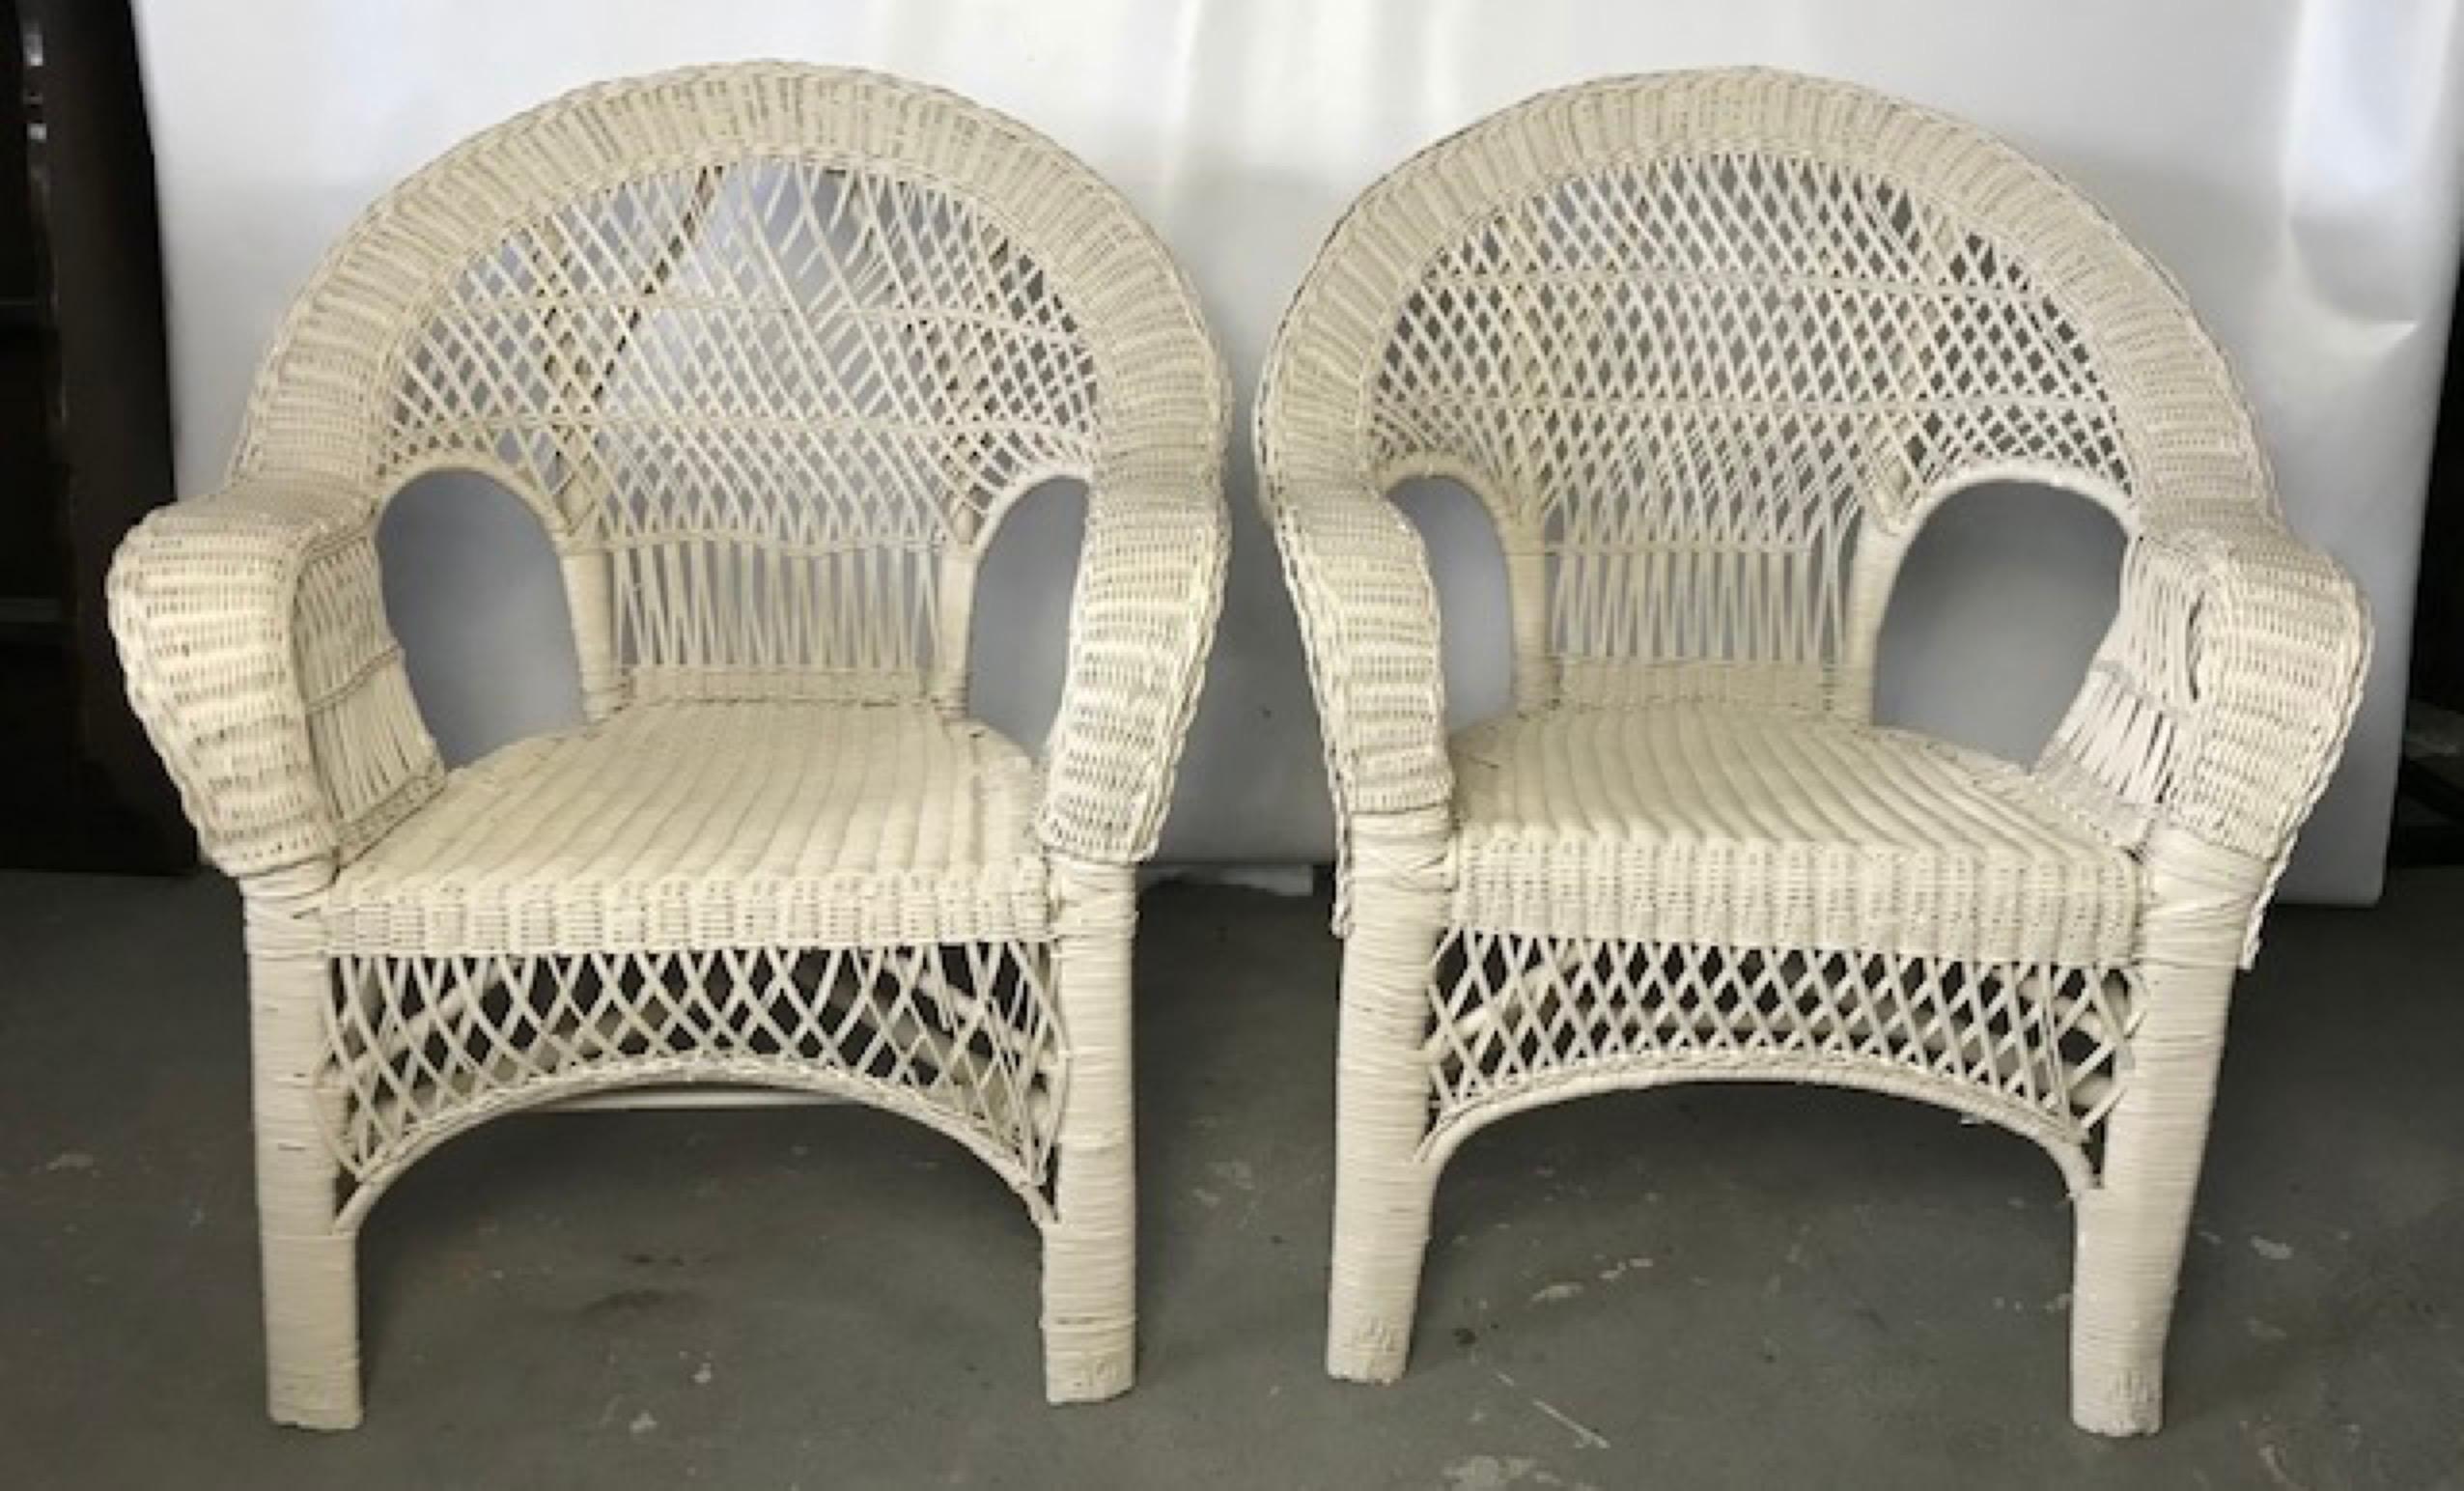 20th Century Pair of Victorian Style Wicker Wide Arm Armchair